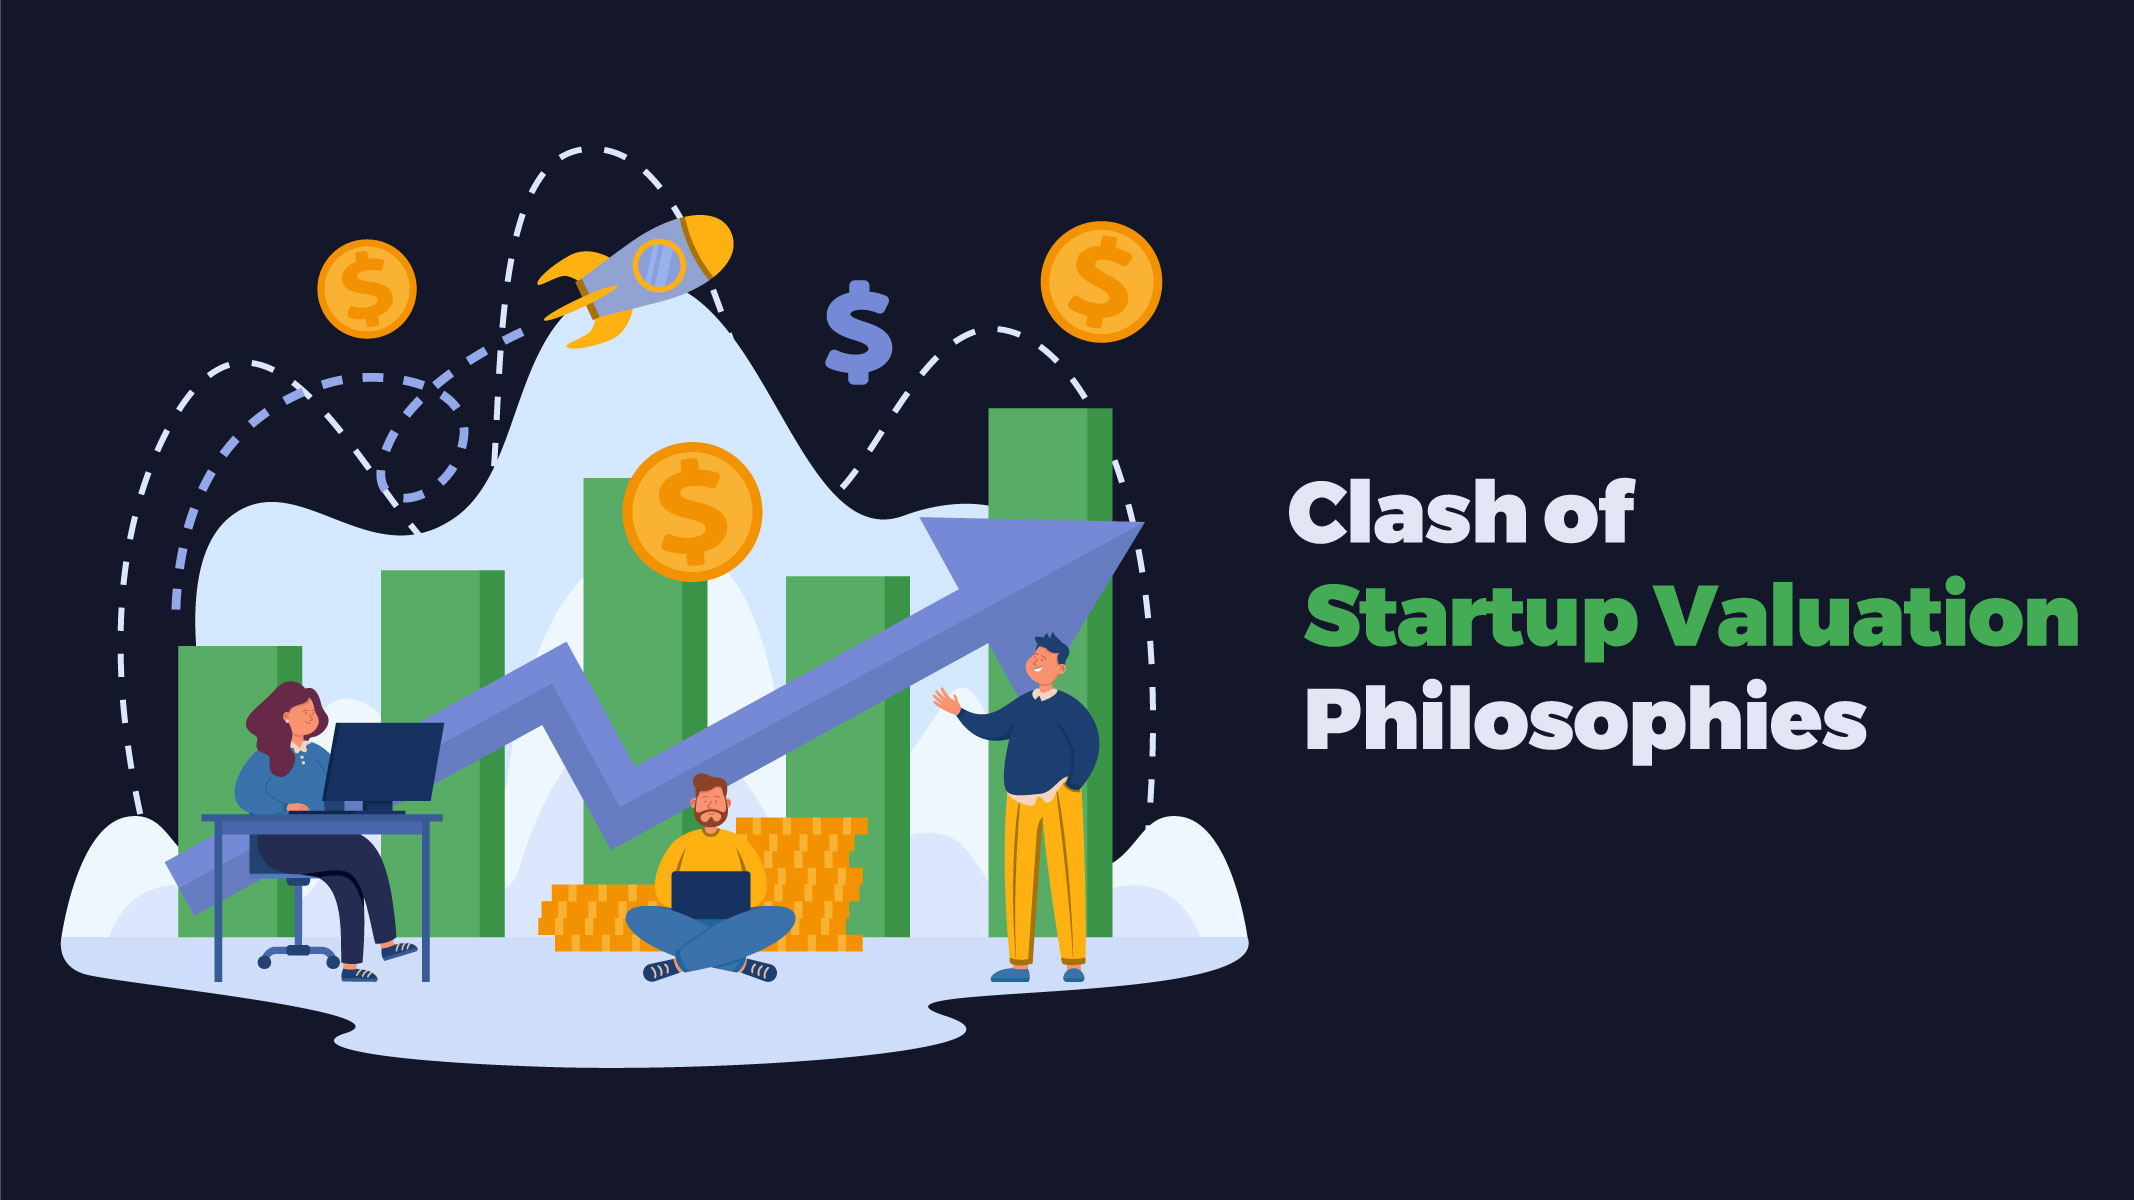 Clash of Startup Valuation